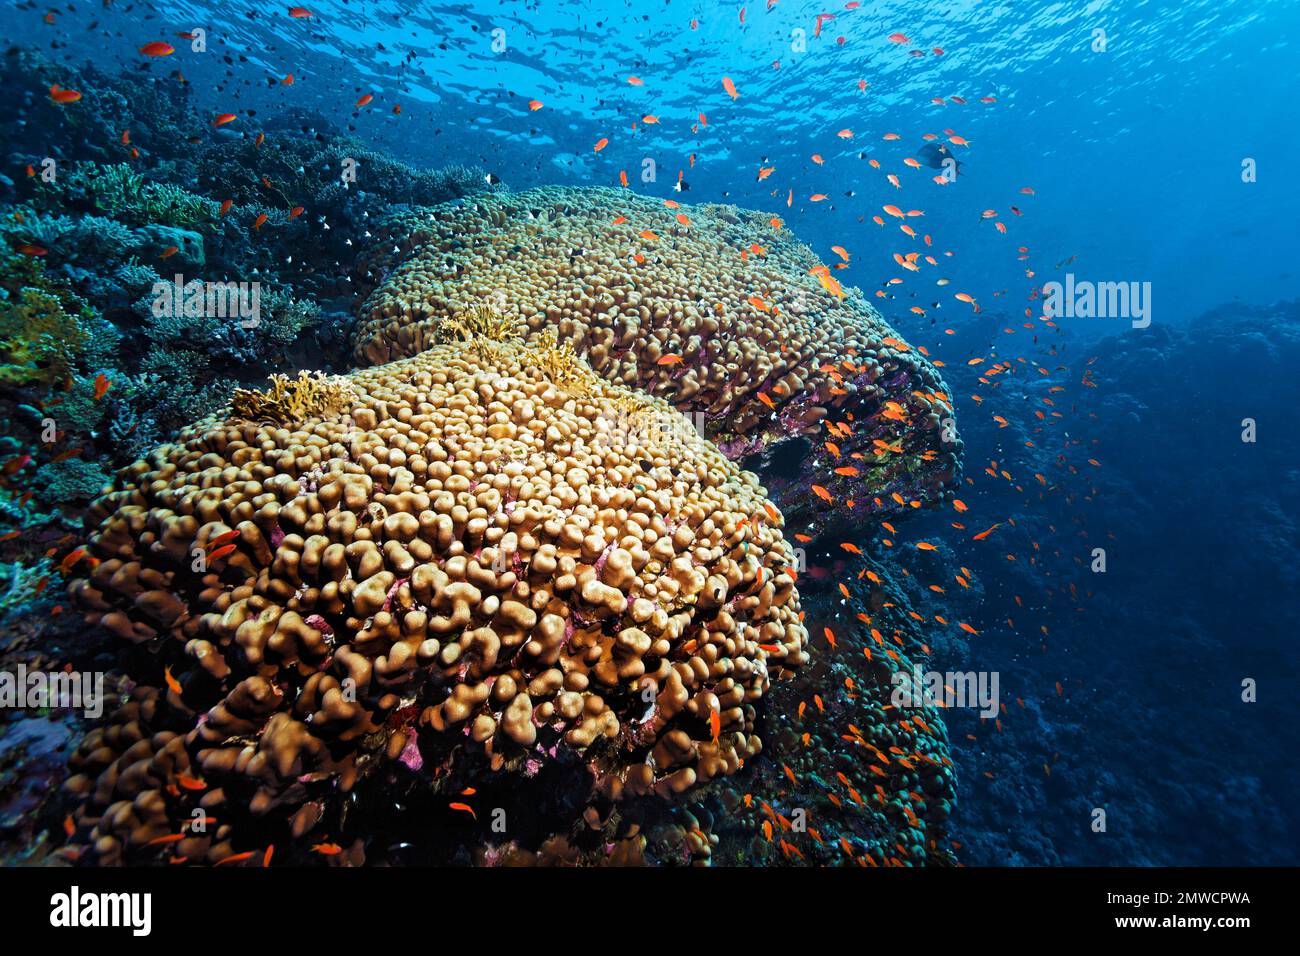 Coral reef with dome coral (Porites nodifera) and shoal of red sea basslet (Pseudanthias taeniatus) flagfish, Ras Muhammed National Park, Red Sea Stock Photo